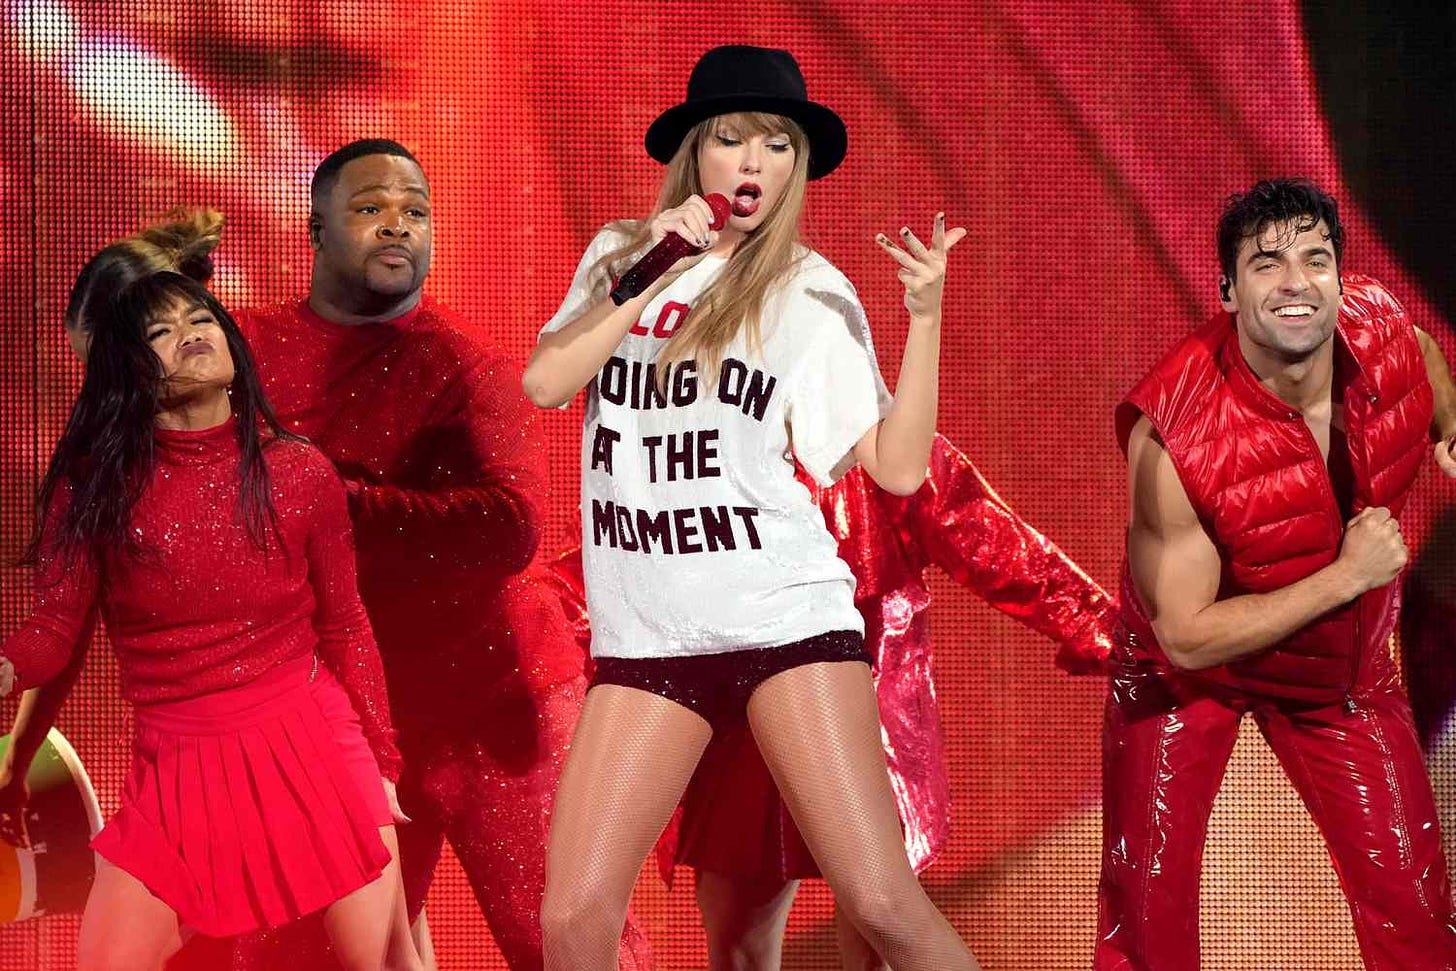 Taylor's Eras Tour red outfit, black hat, white shirt that says "a lot going on at the moment," black mini shorts. Three backup dancers in red outfits, the one on the far left is making a constipated face.